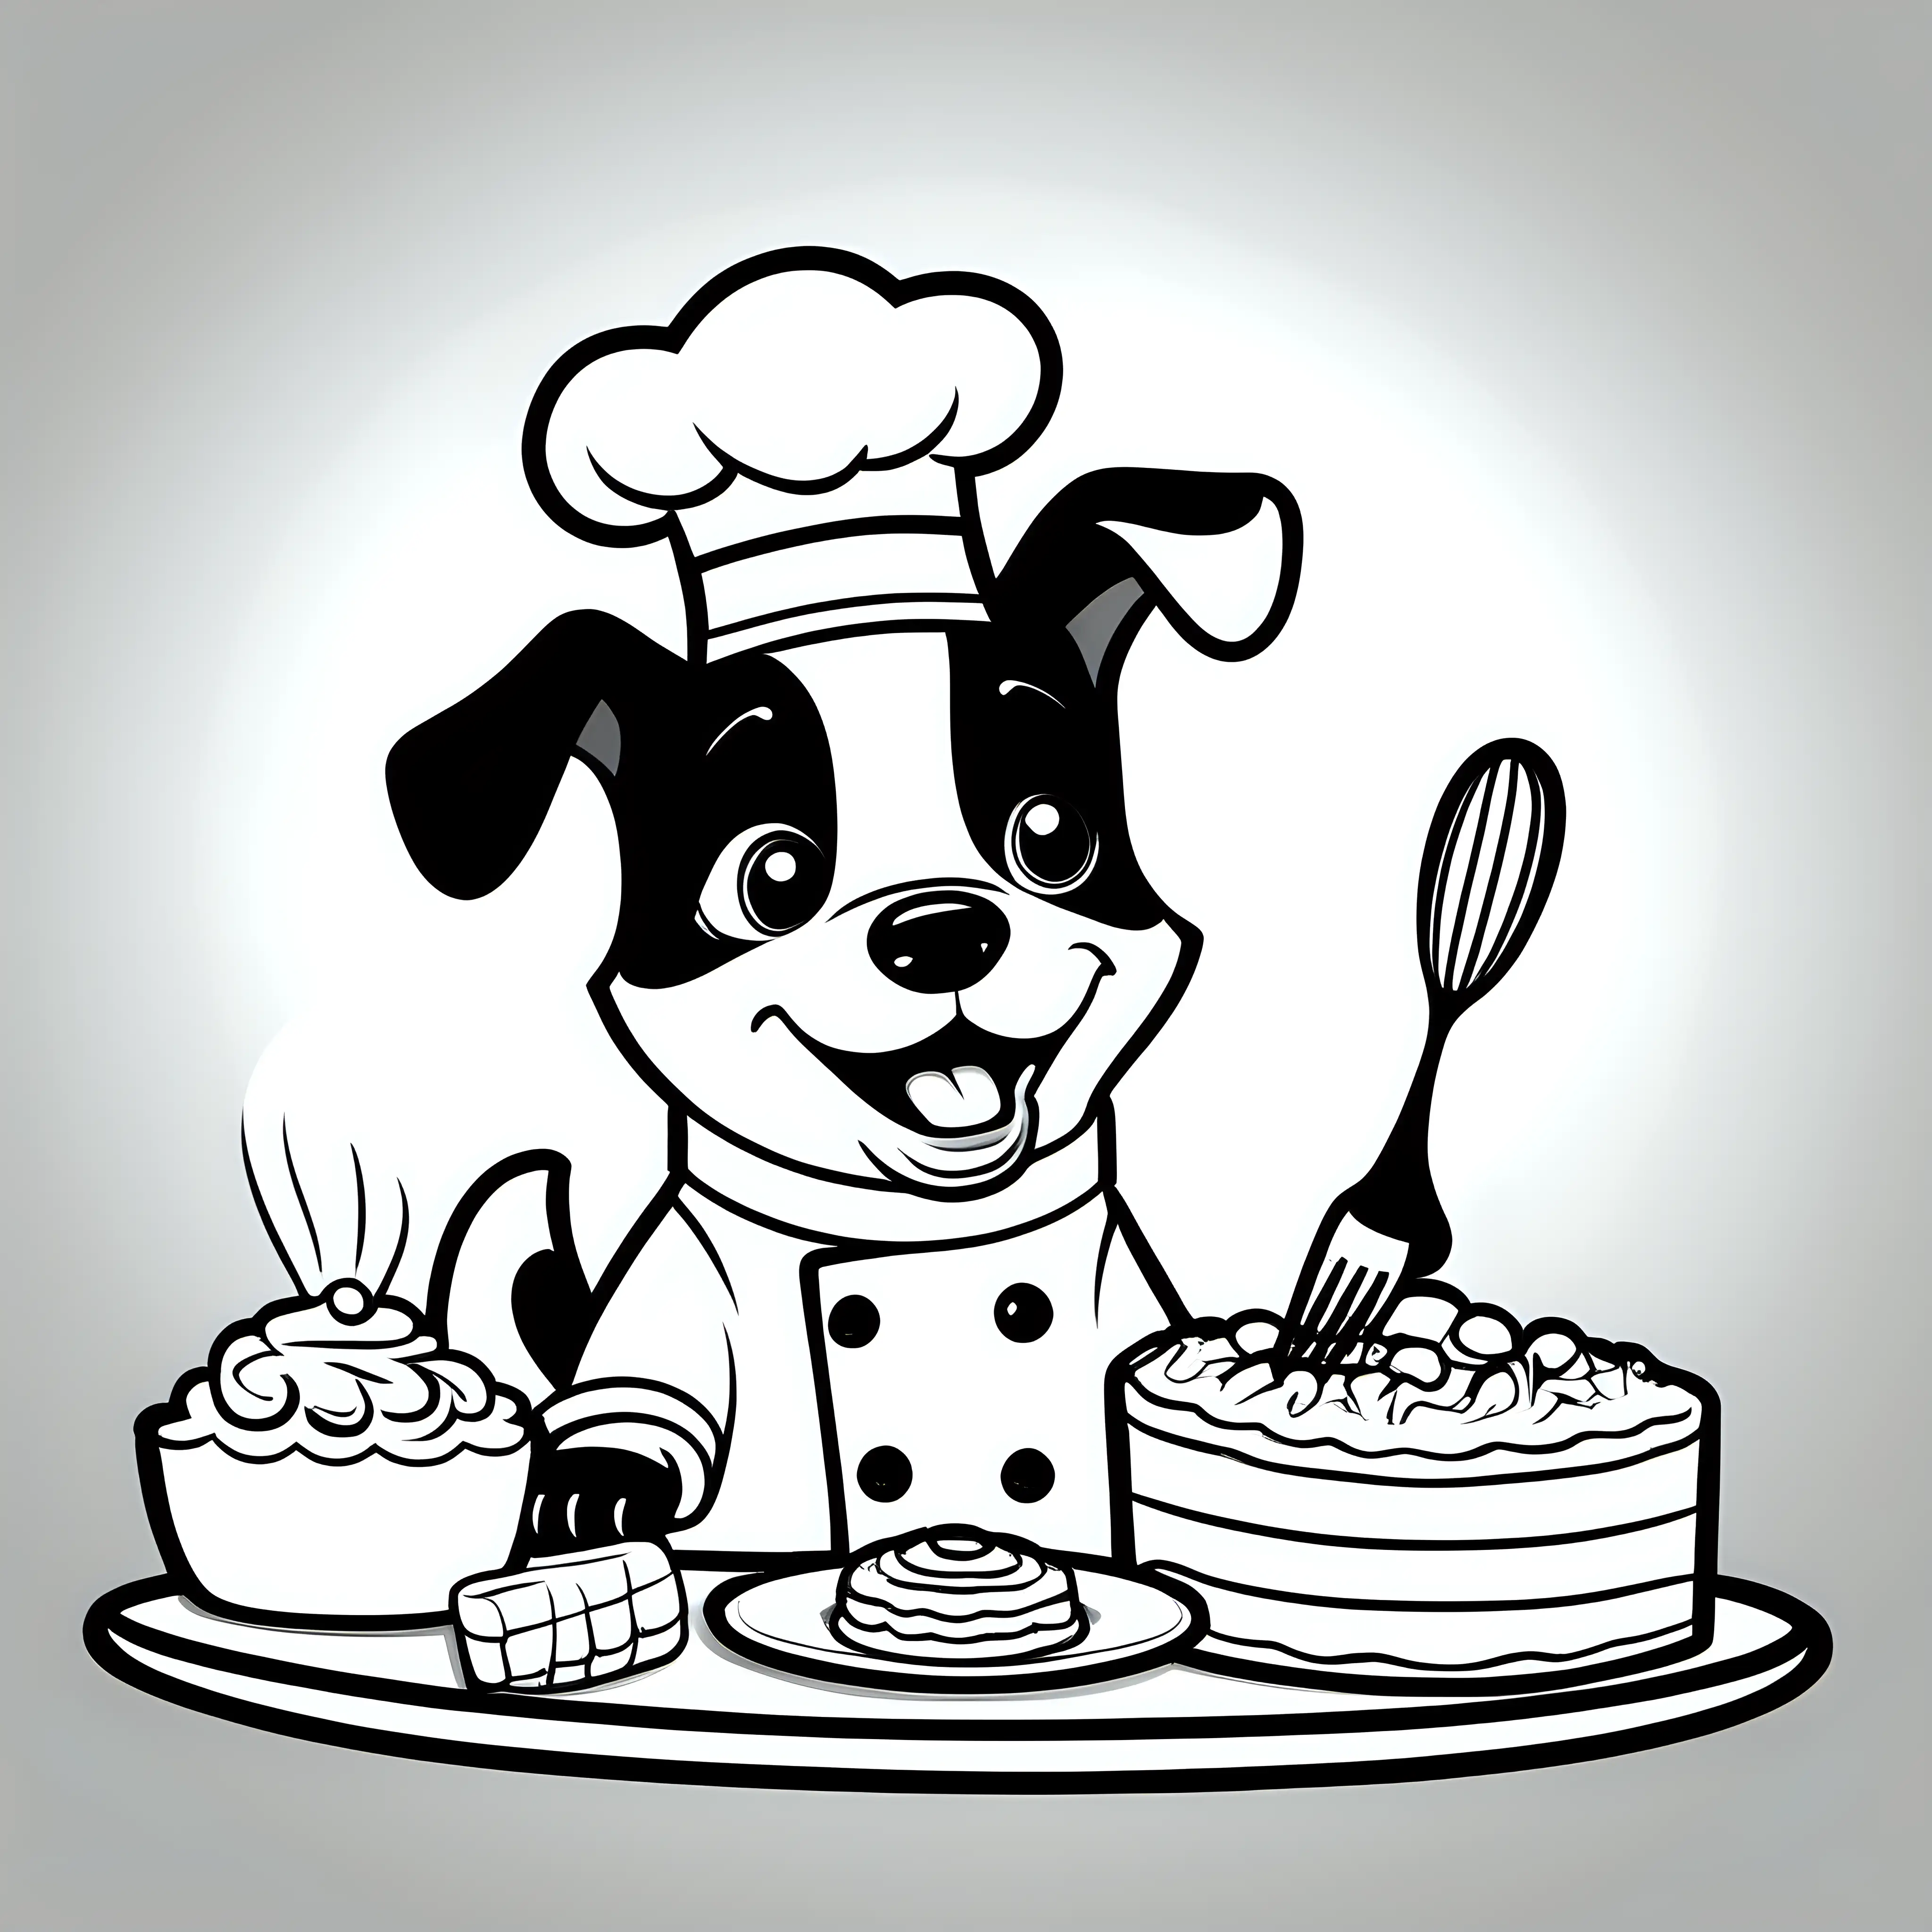 Adorable Dog Chef Baking a Cake Fun Coloring Book Illustration with Crisp Lines on a White Background